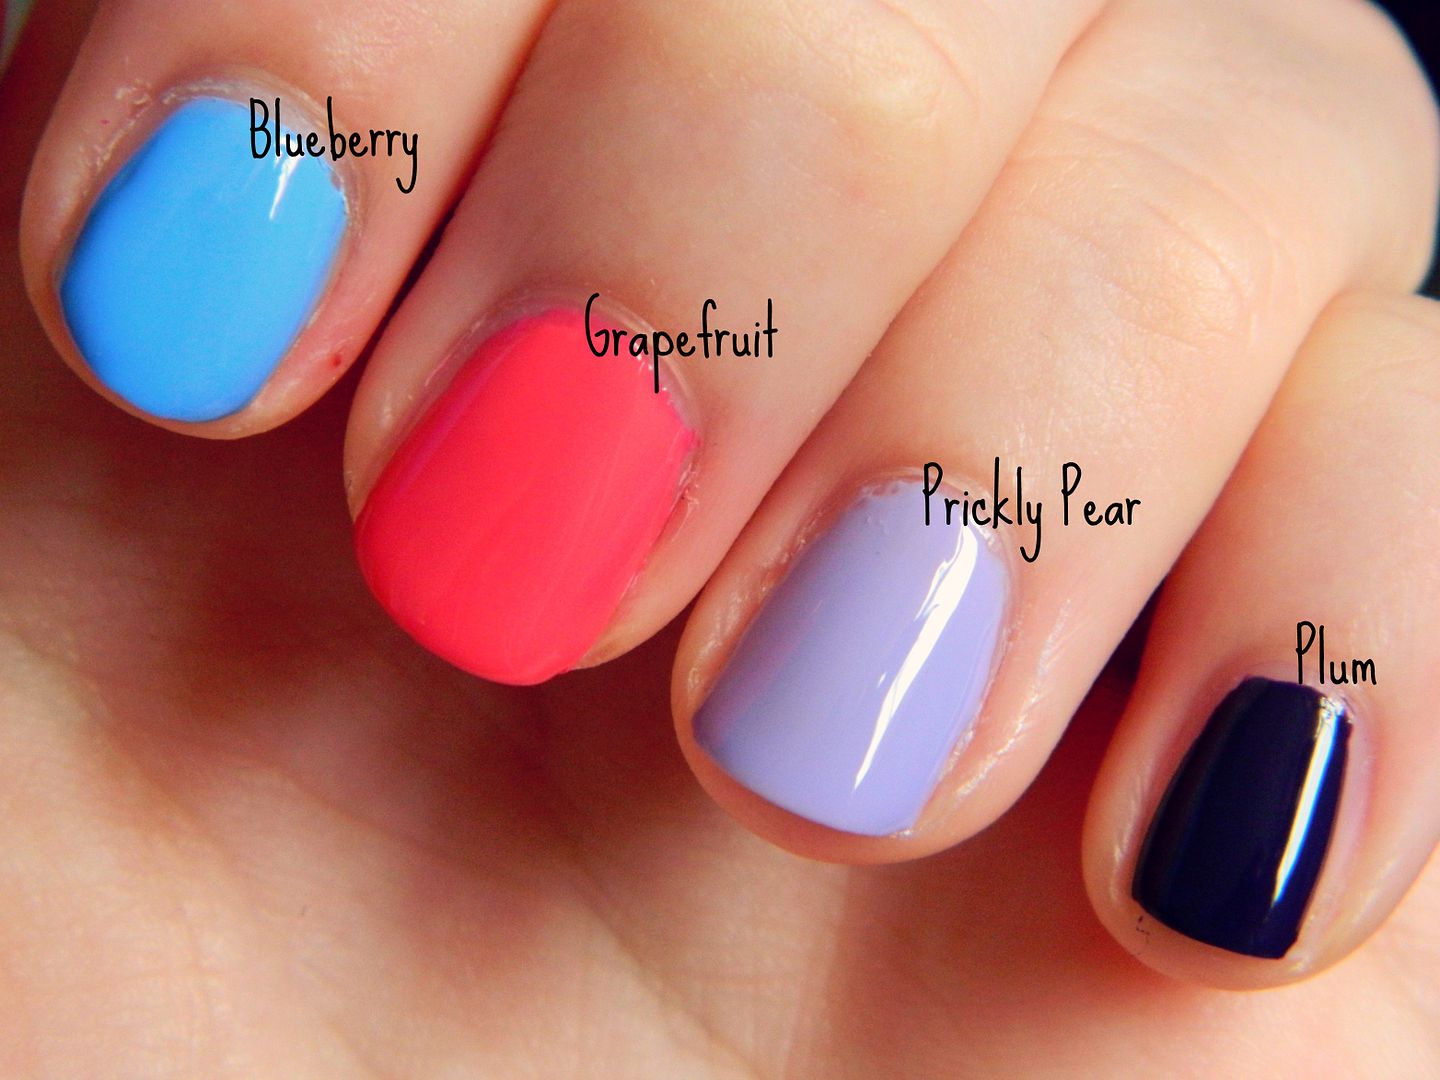 Barry M Gelly Hi Shine Nail Paints Blueberry Grapefruit Prickly Pear Plum Swatches Review Belle-amie